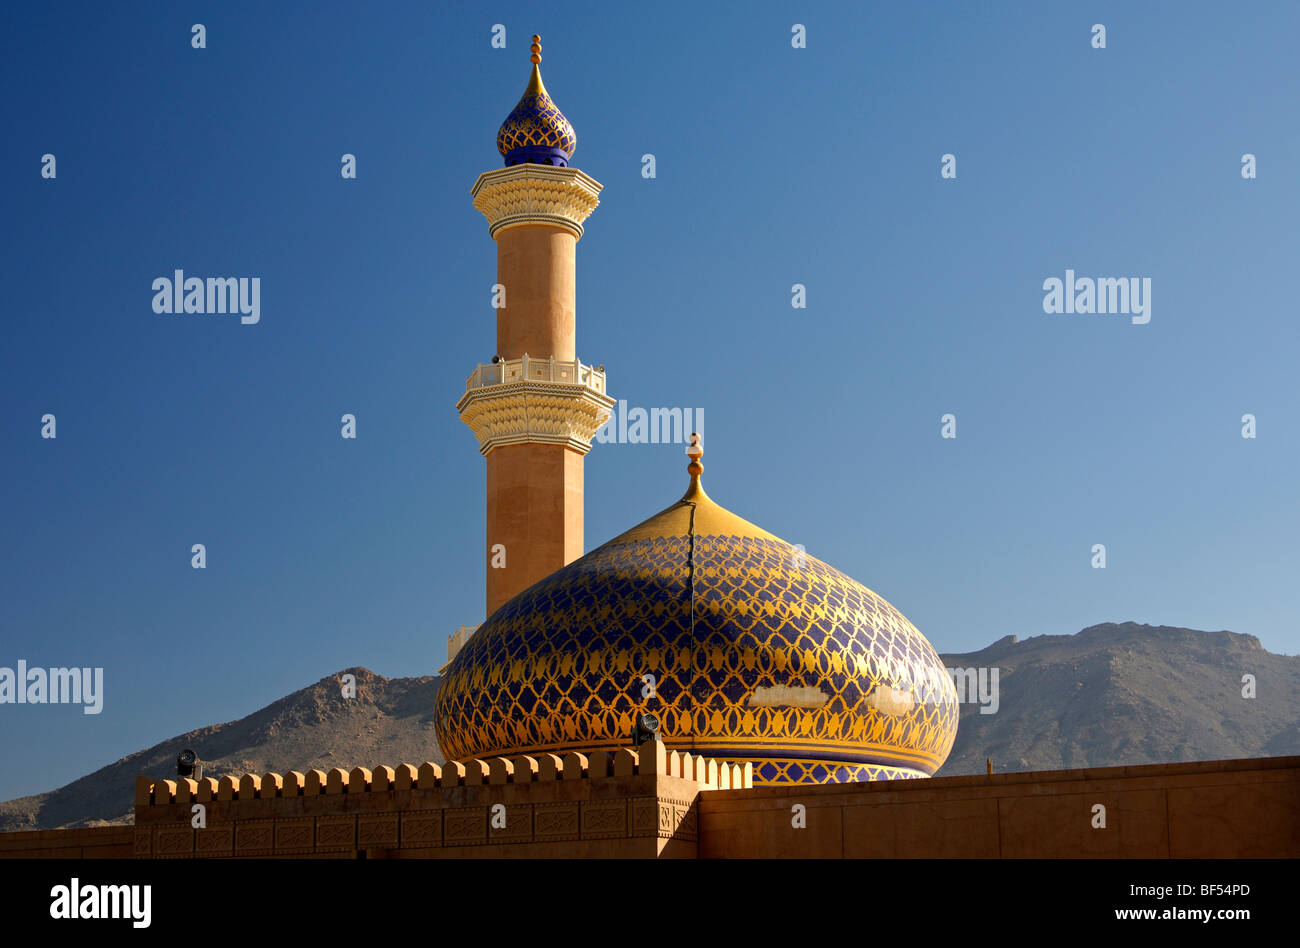 Minaret and dome of the Great Mosque in Nizwa, Sultanate of Oman, Middle East Stock Photo